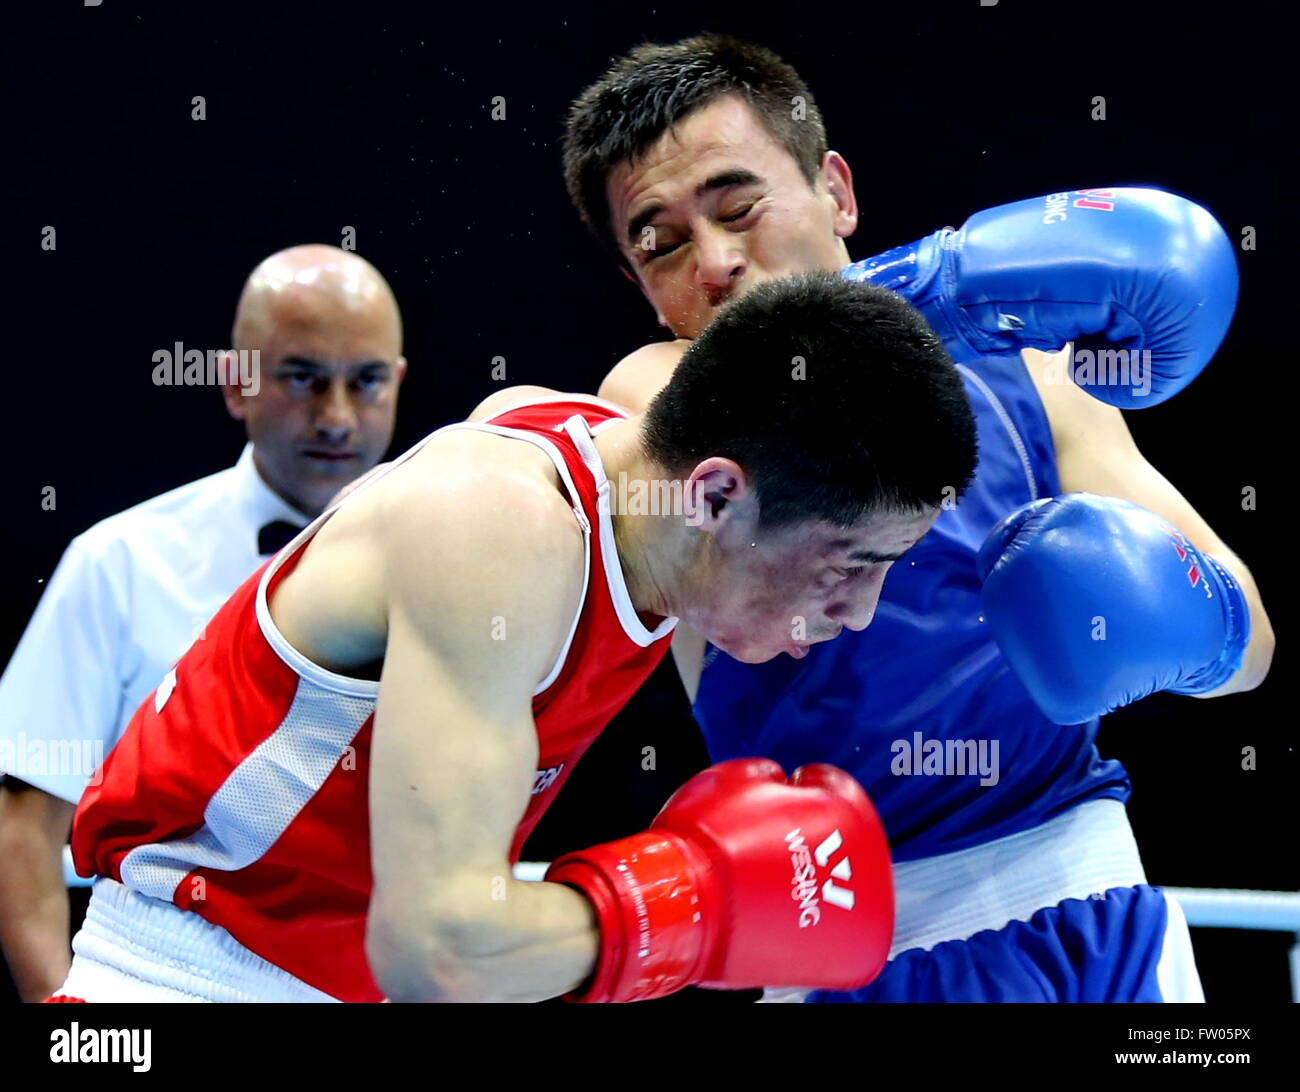 Qian'an, China's Hebei Province. 31st Mar, 2016. Hasanboy Dusmatov(R) of Uzbekistan competes with Gan-Erdene Gankhuyag of Mongolia during their men's 64kg category of Asia/Oceania Zone boxing event qualifier for 2016 Rio Olympic Games in Qian'an, north China's Hebei Province, March 31, 2016. Hasanboy Dusmatov won the match 3-0. © Yang Shiyao/Xinhua/Alamy Live News Stock Photo